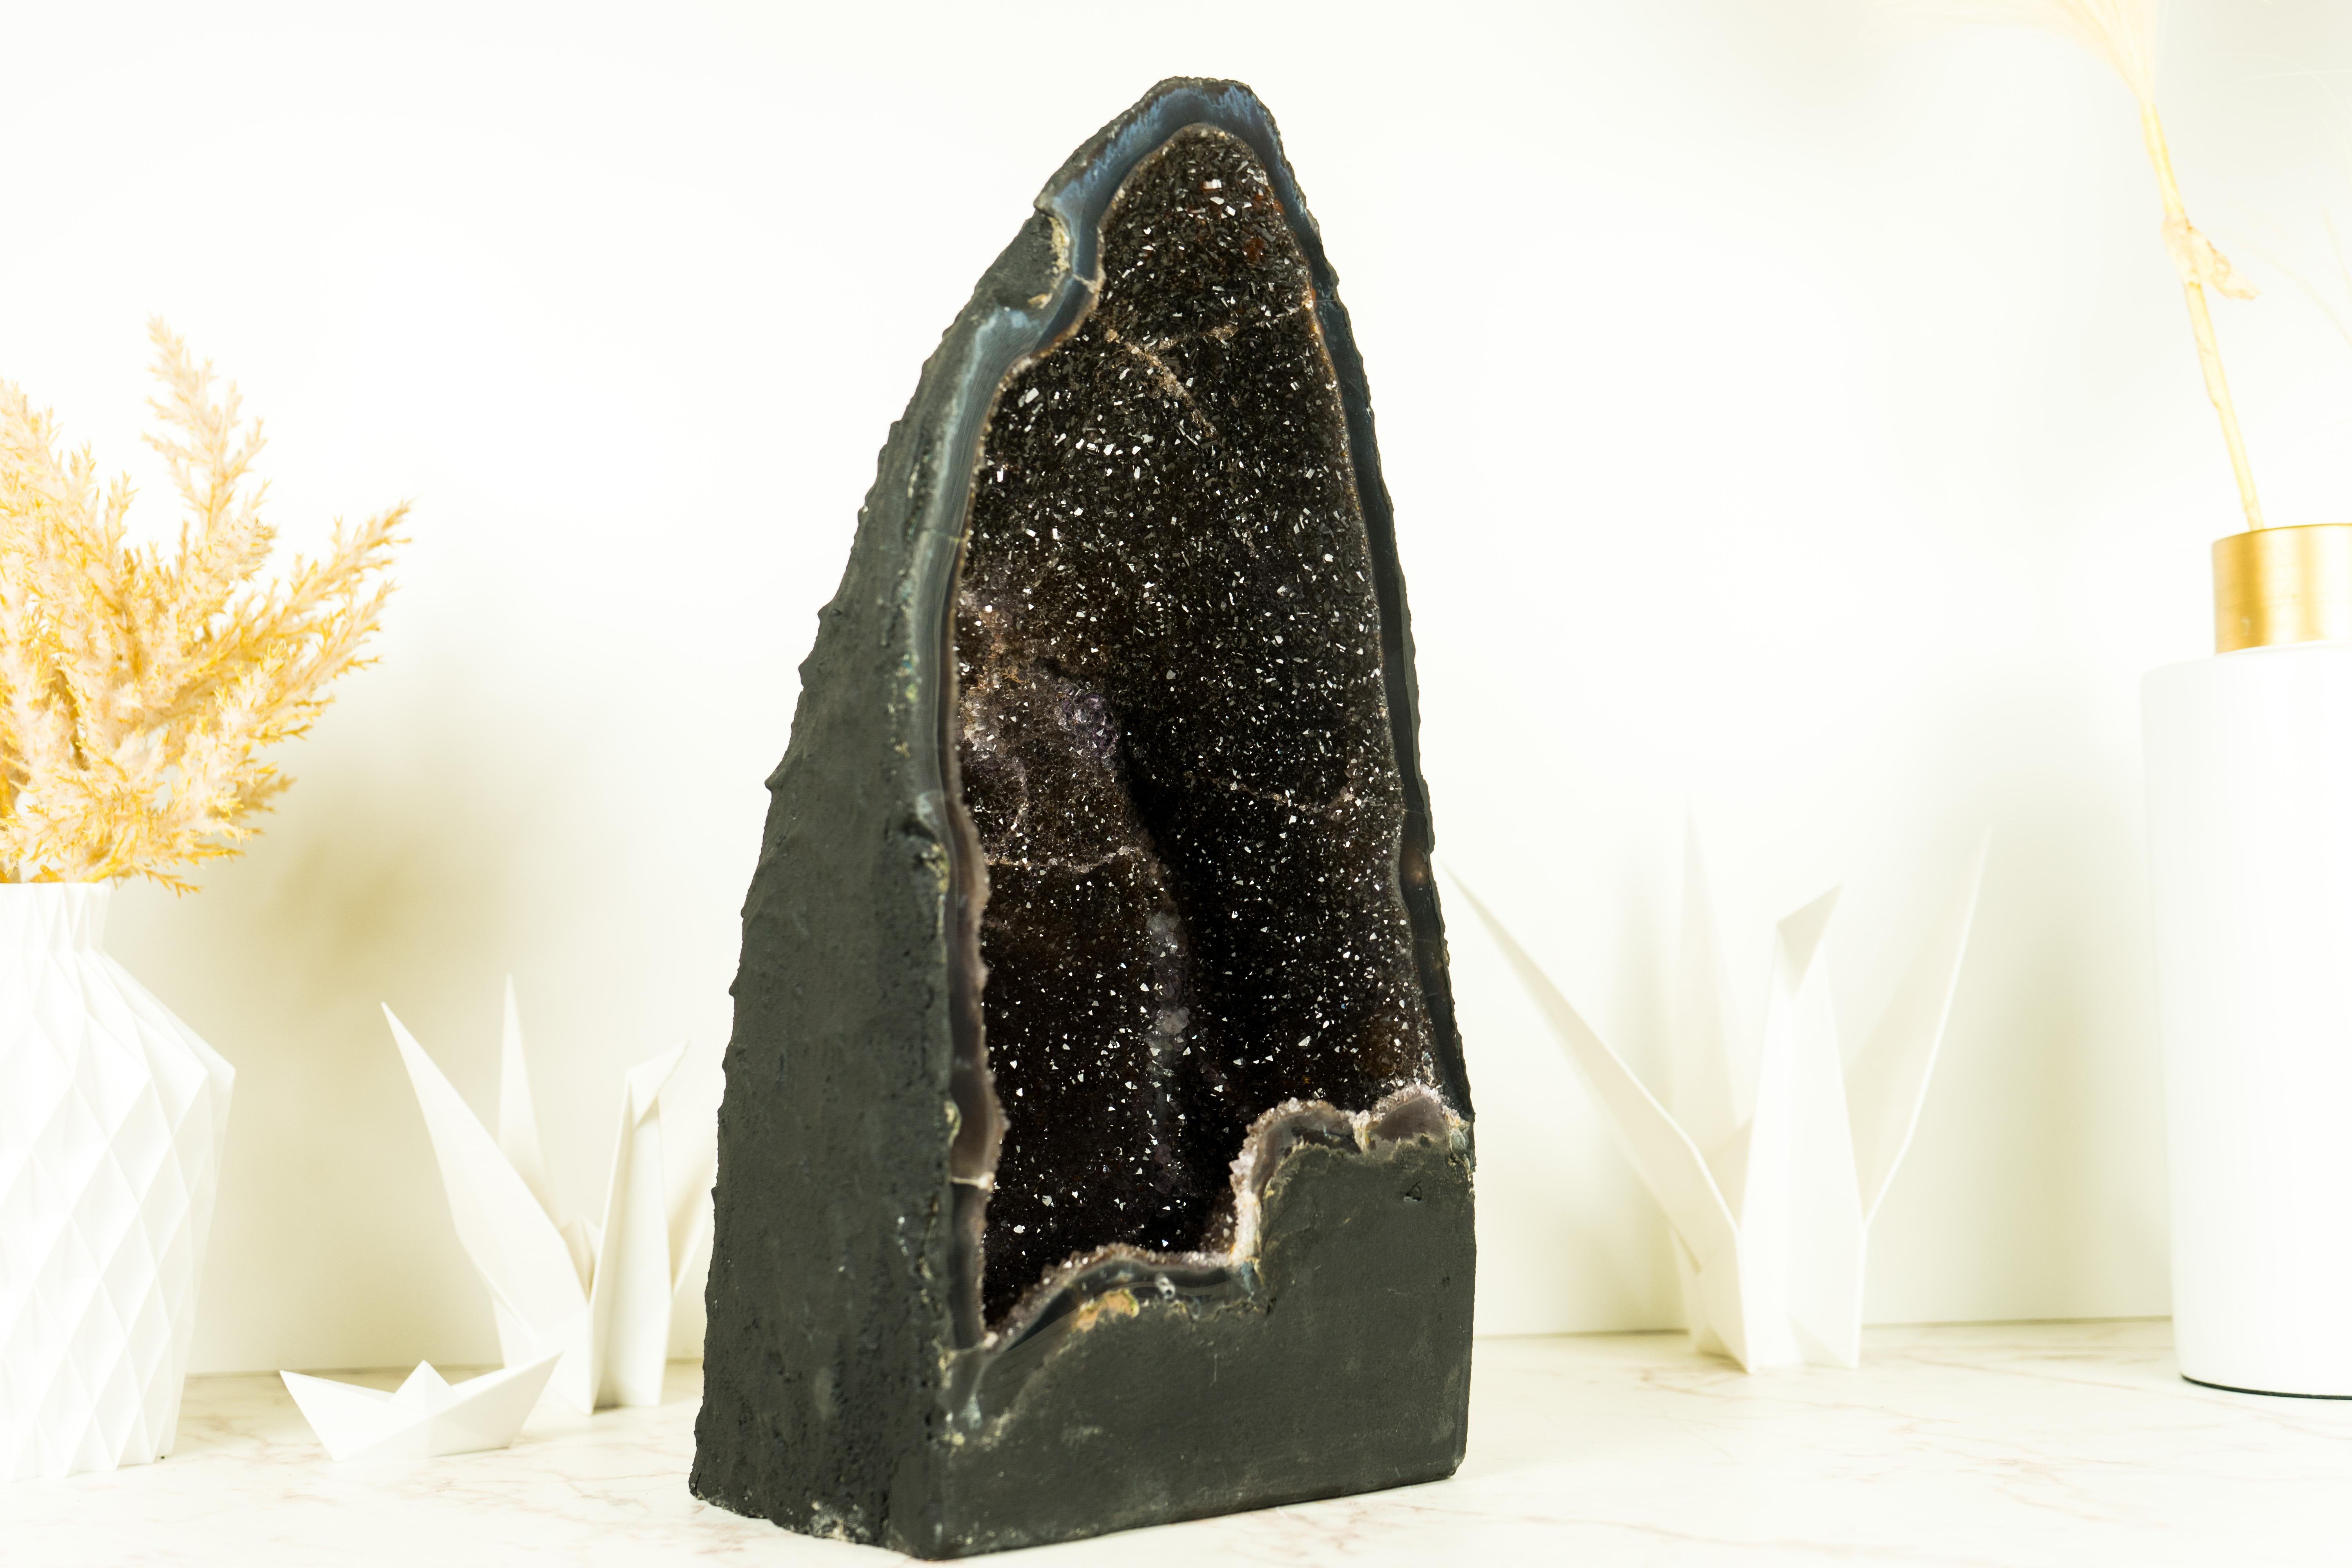 Elevate your space, decor, or collection with the captivating beauty of this Amethyst Geode featuring mesmerizing Black Galaxy Druzy, a rare form of Amethyst that resembles a starry night sky captured within the crystal.

The first thing that